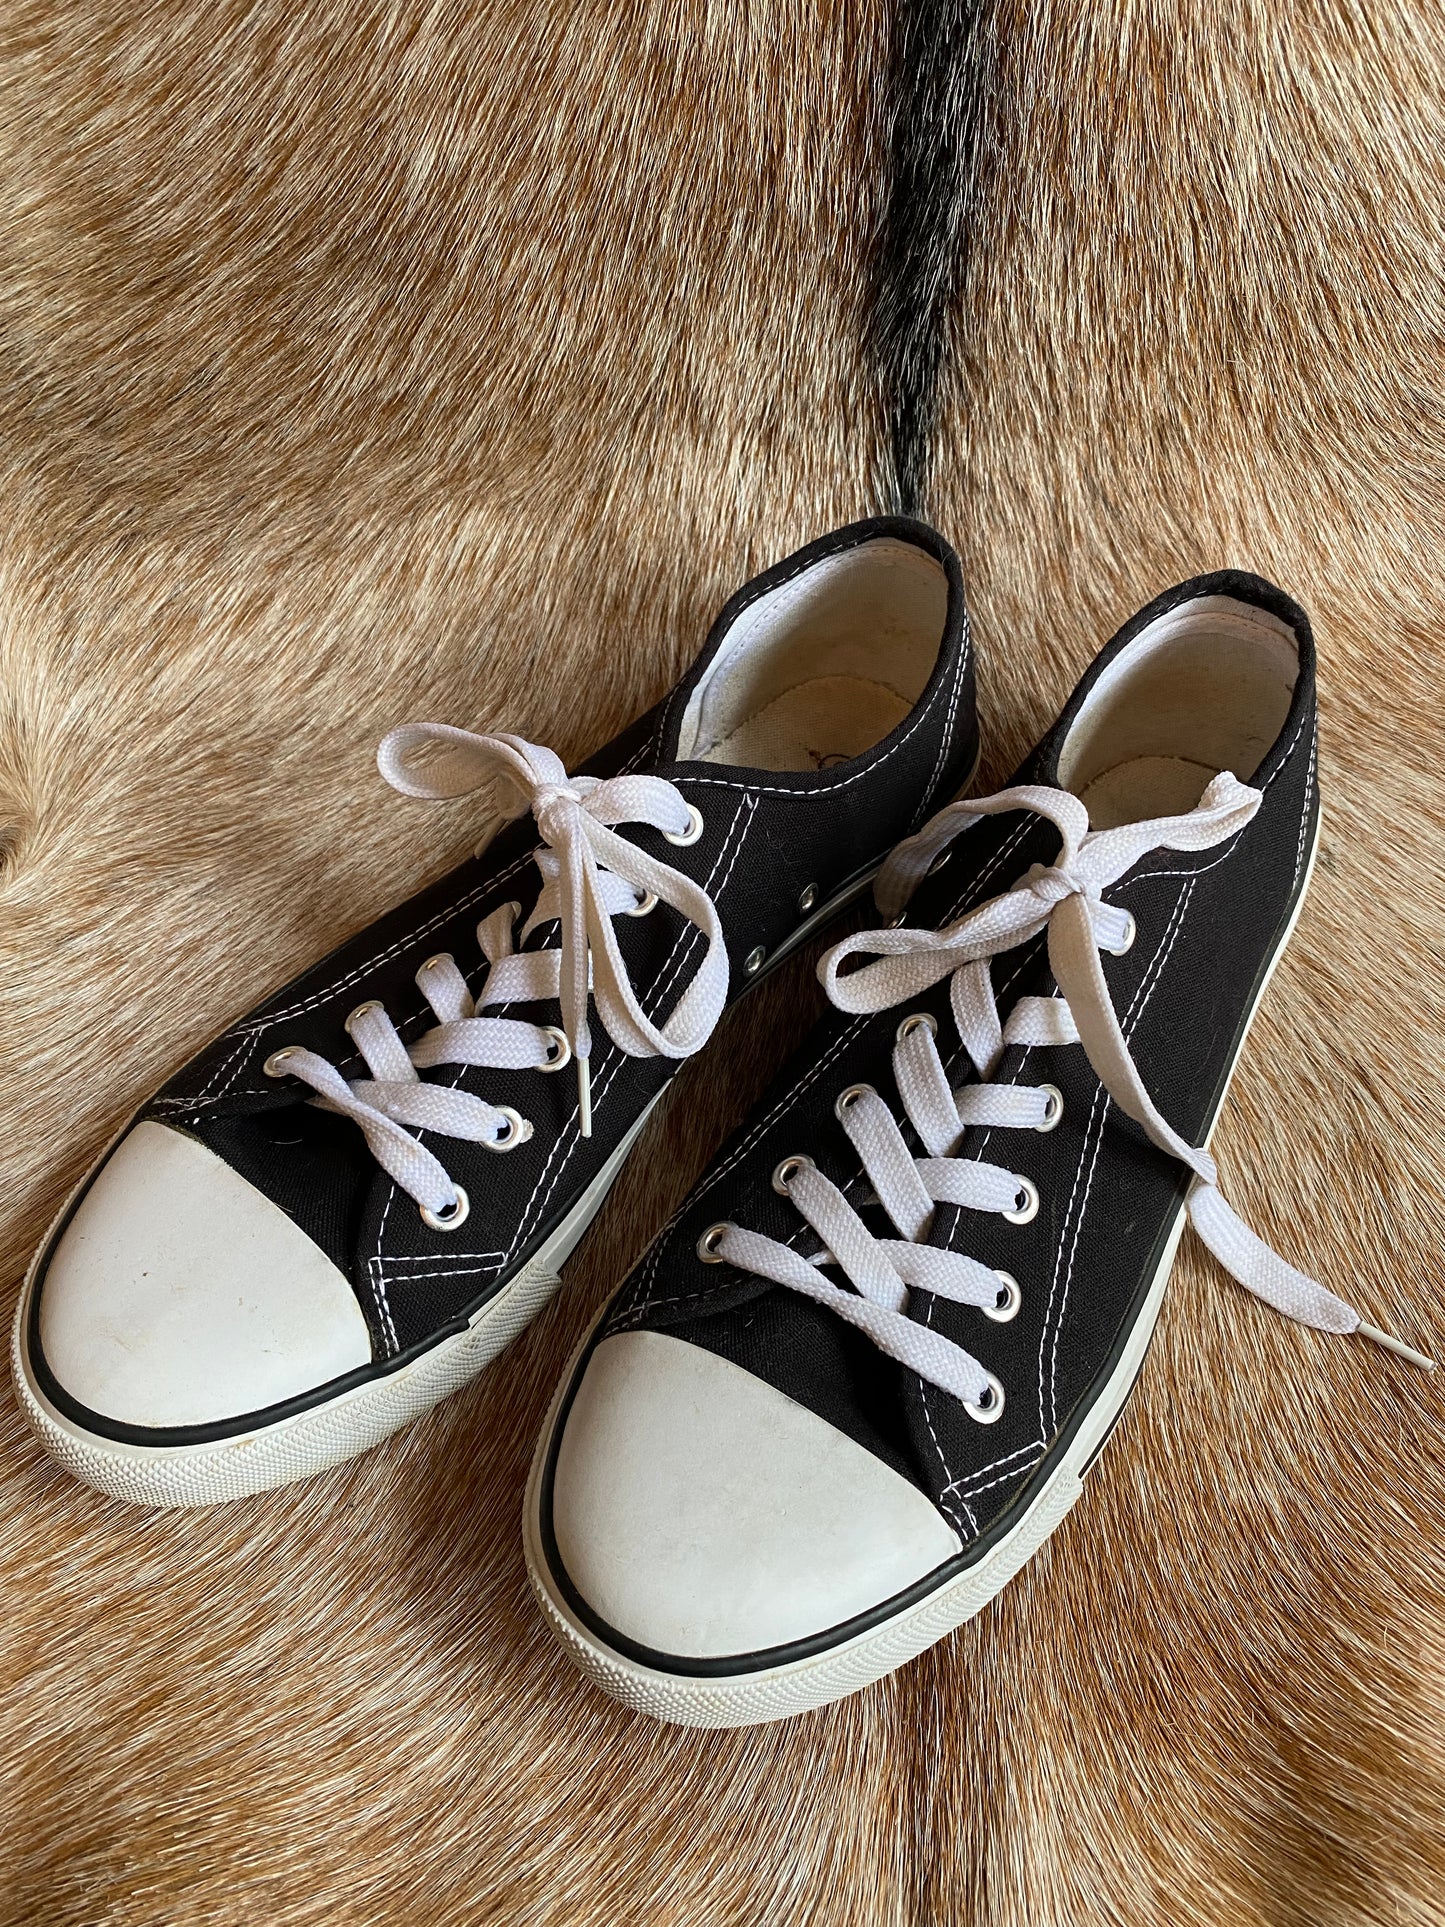 Classic Black & White Converse Low Top Sneakers